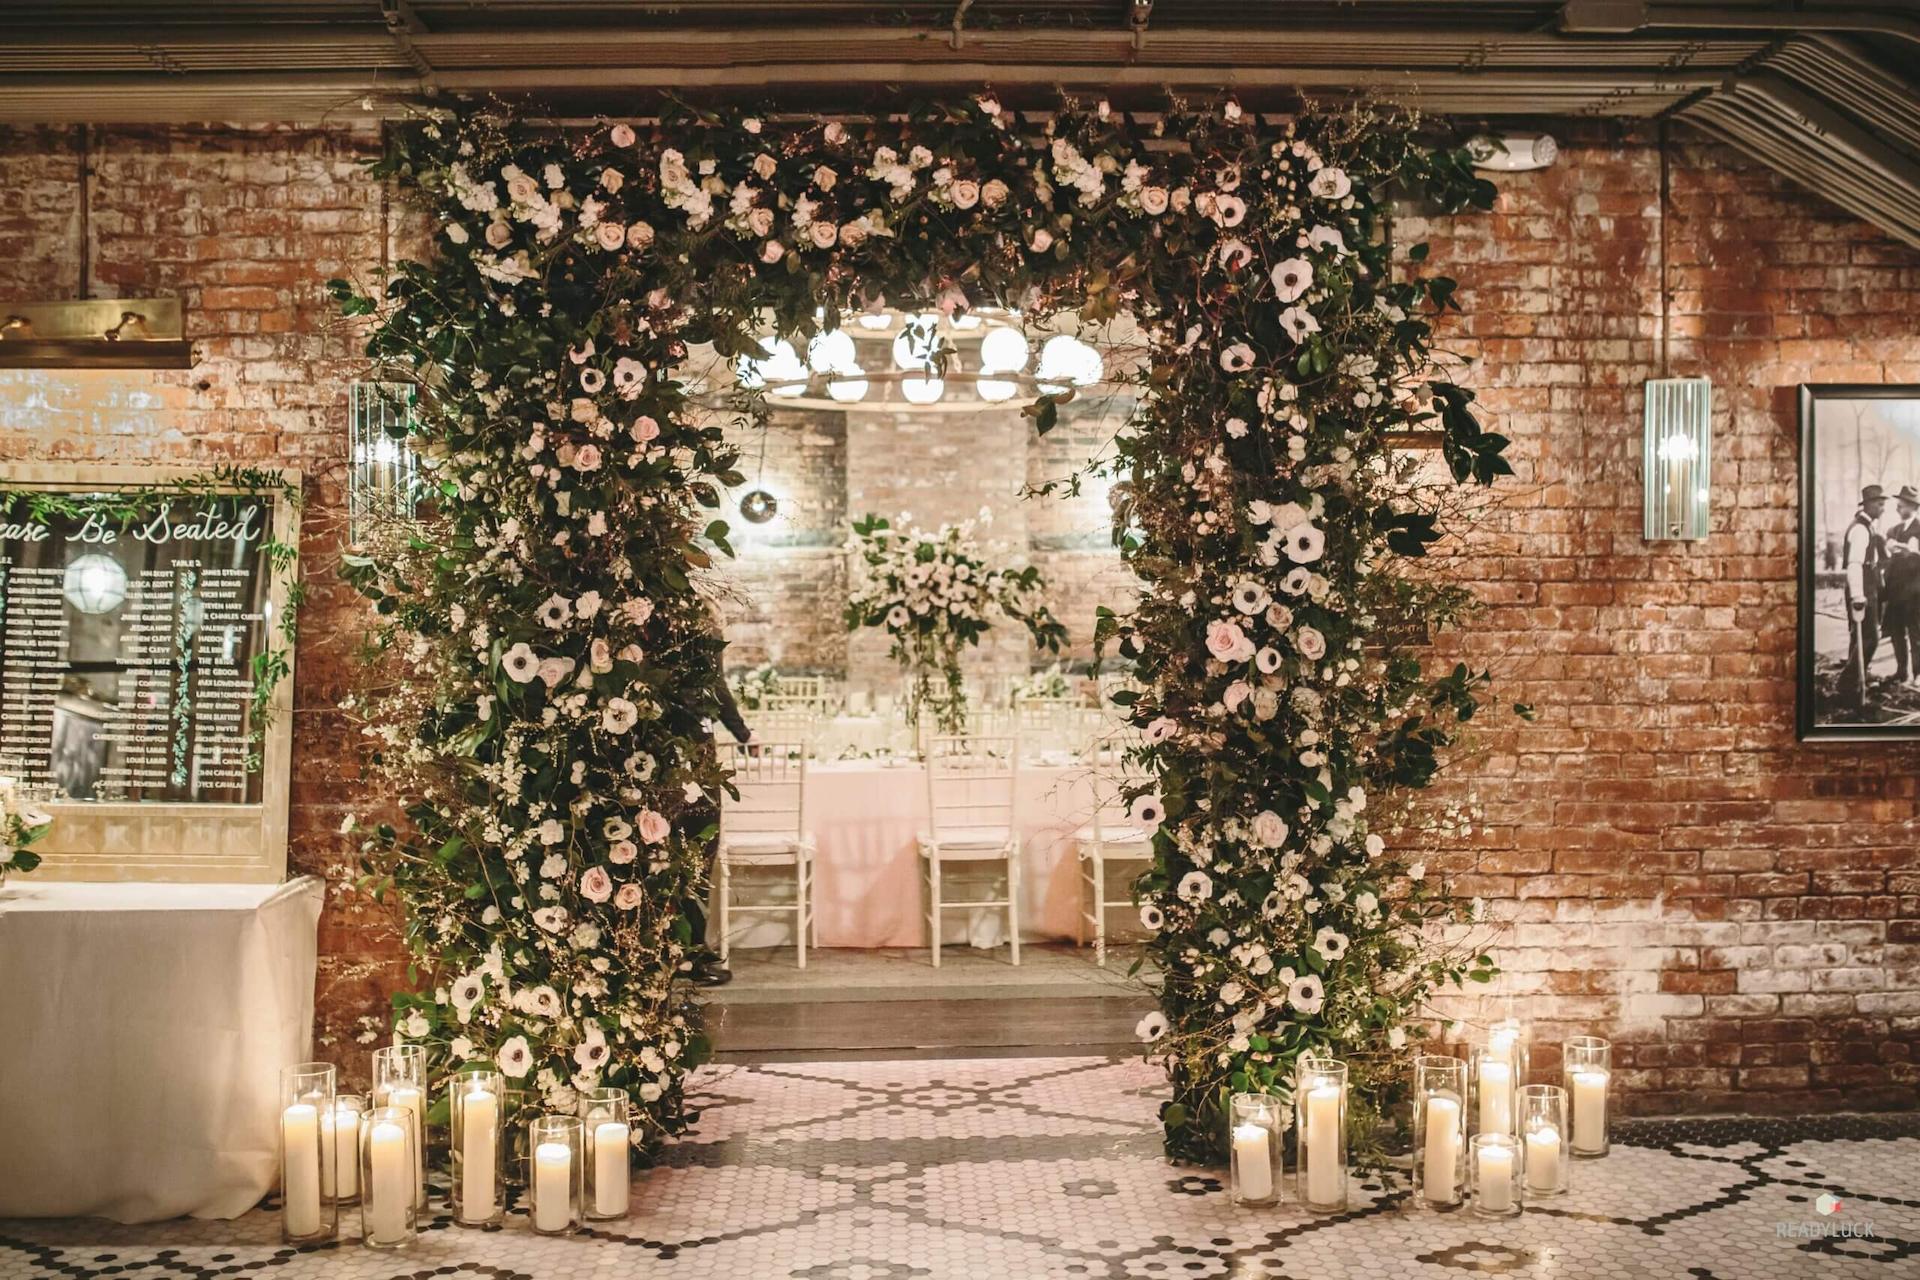 The entrance door is beautifully decorated with flowers, leaves, and glass candles